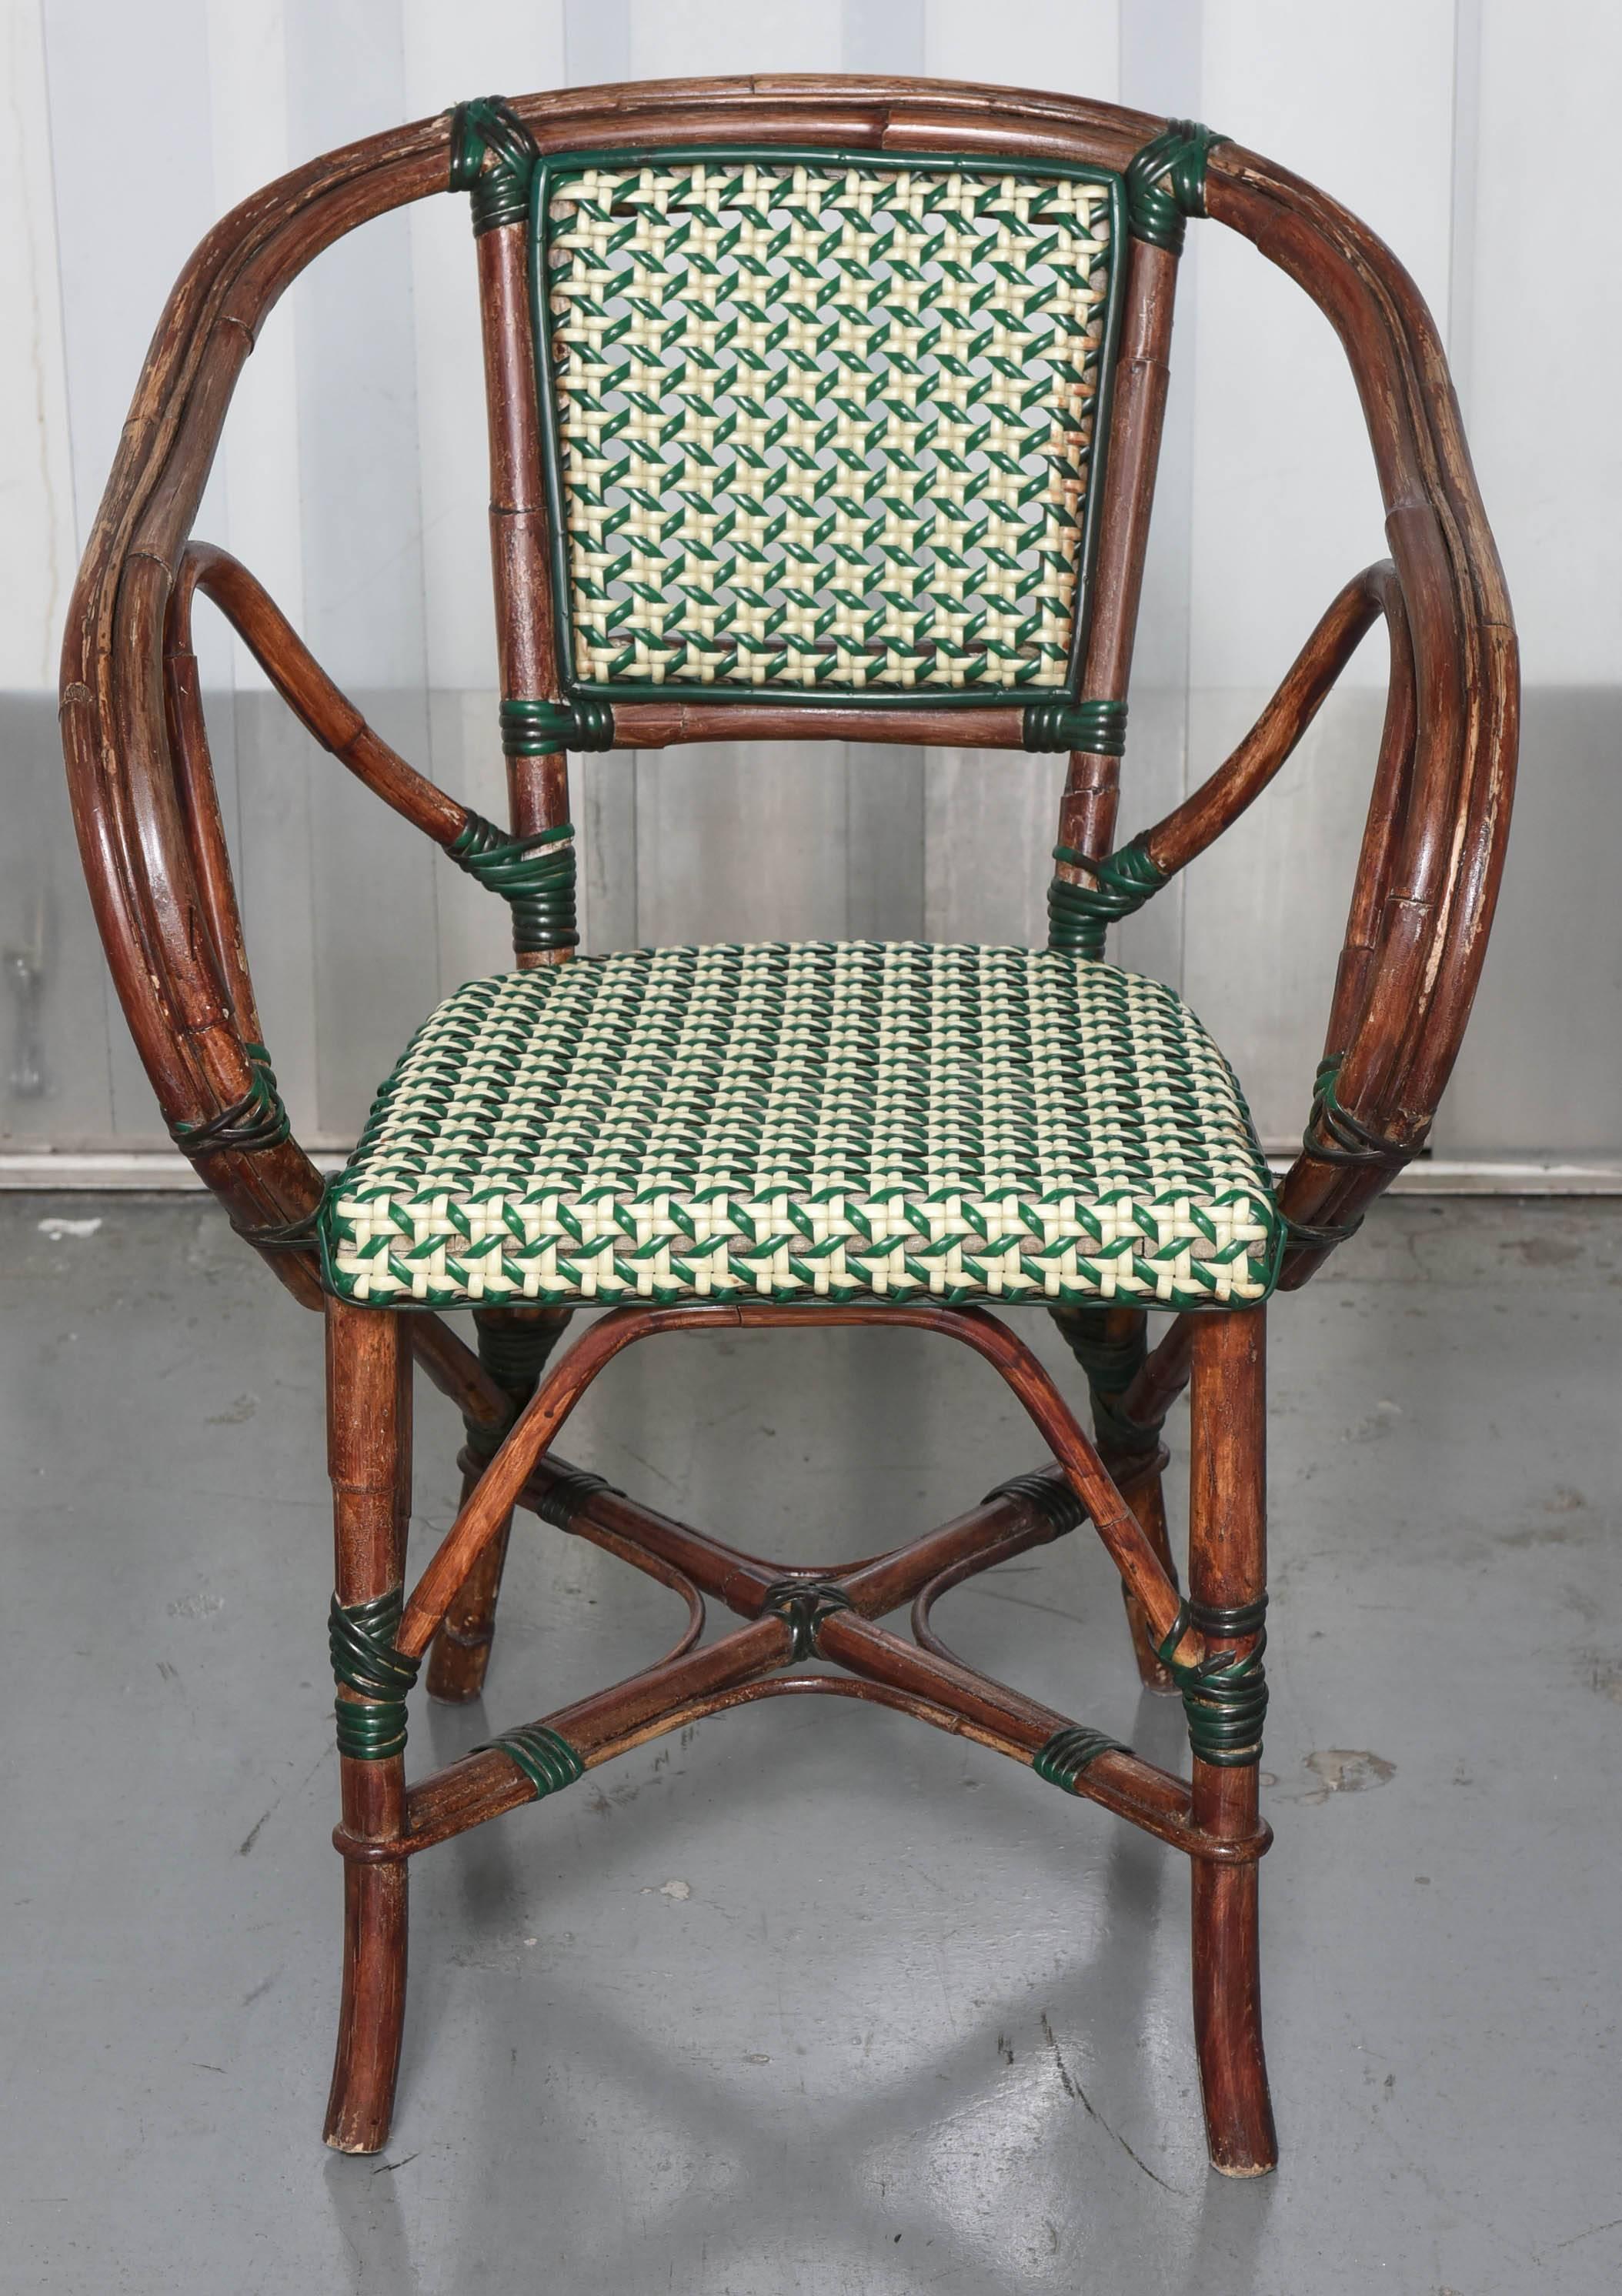 Three French Pairs of bamboo cafe chairs with green and white plastics seats and back seats.